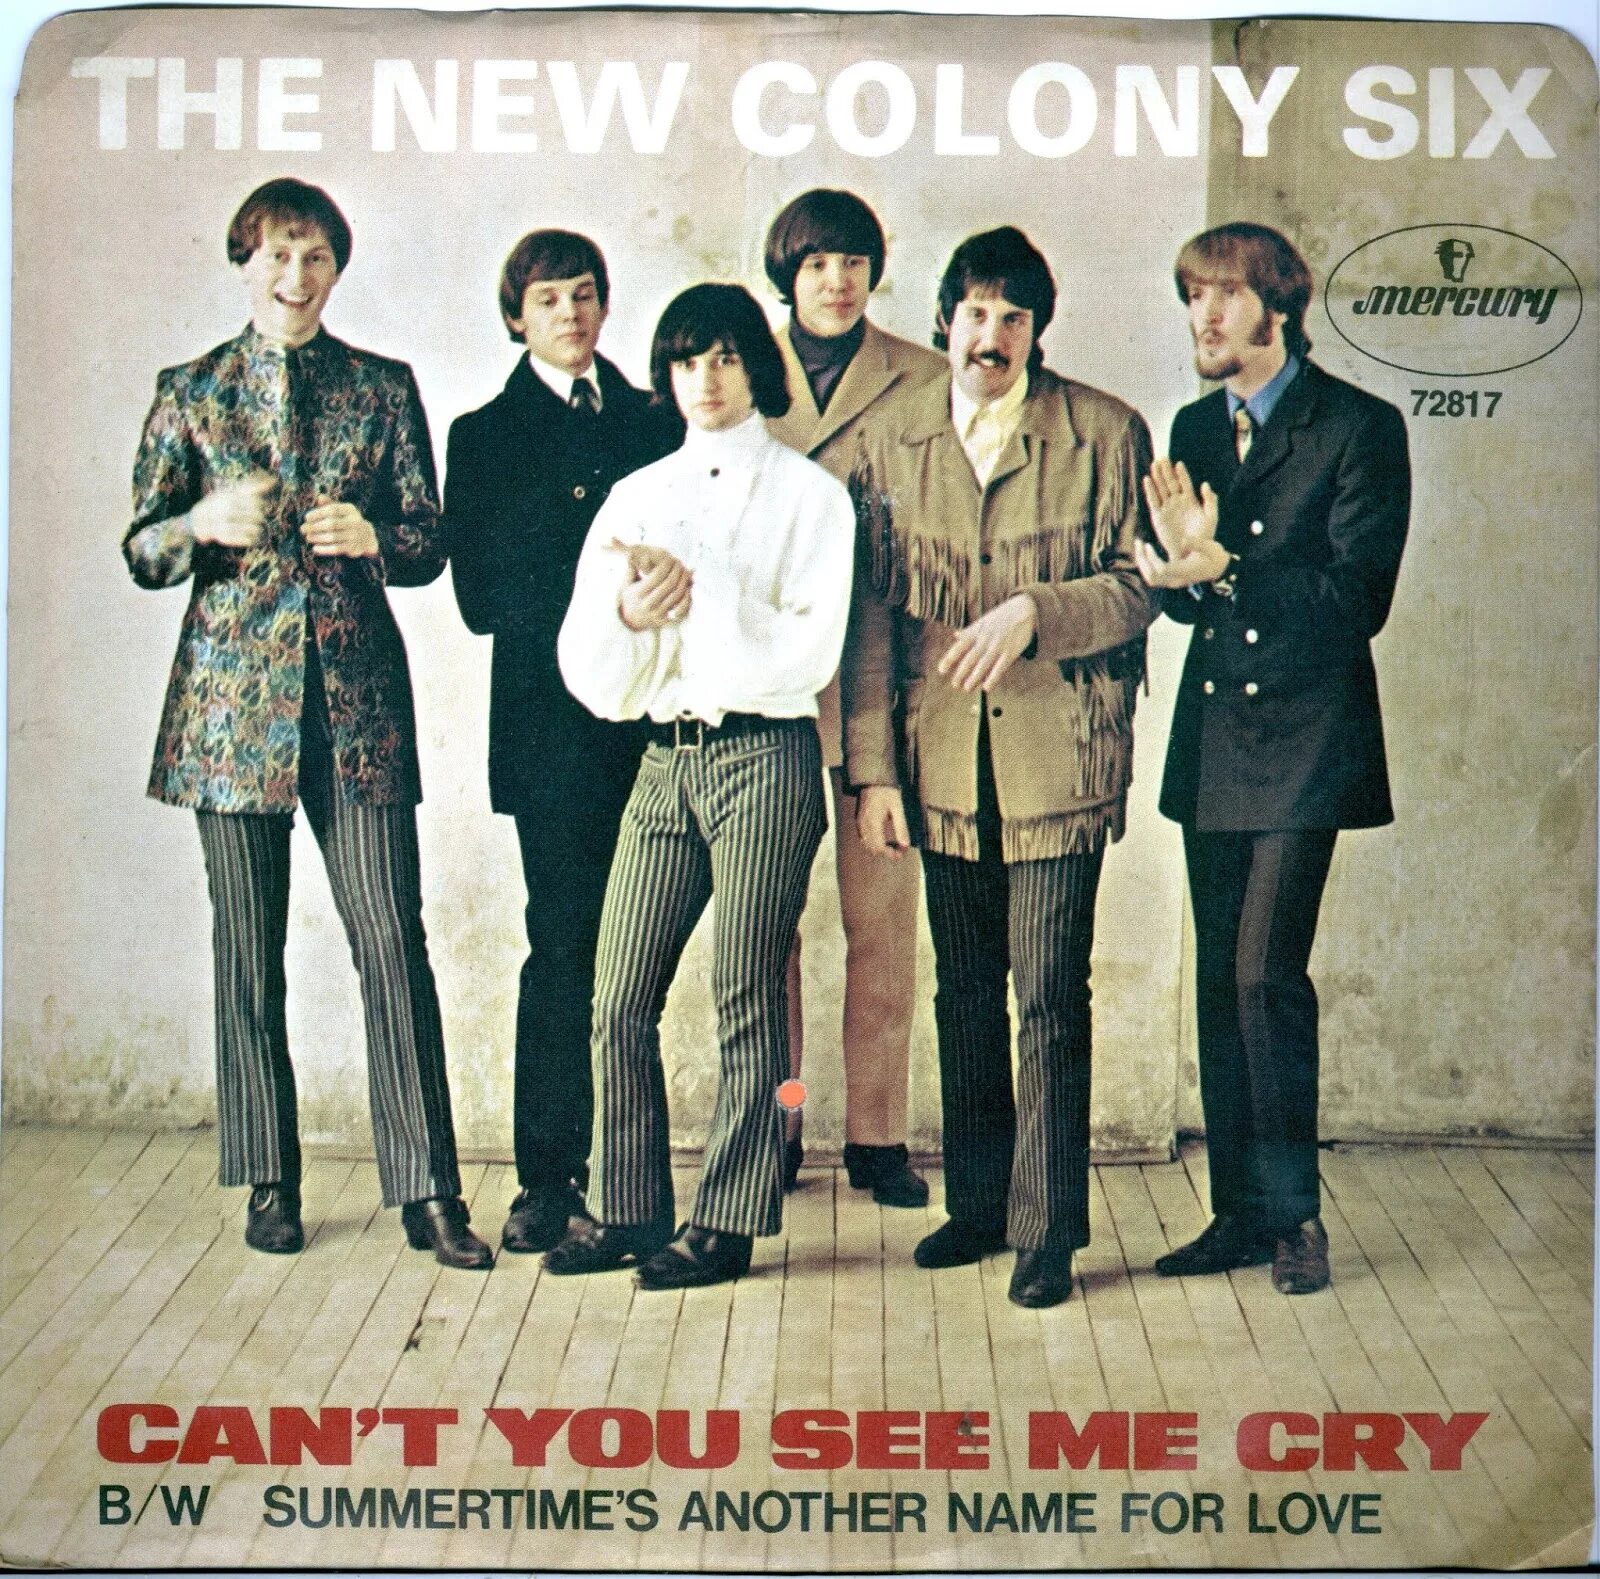 The New Colony Six. New Colony Six Band. The Six группа 1977. Six cannot. The new six группа